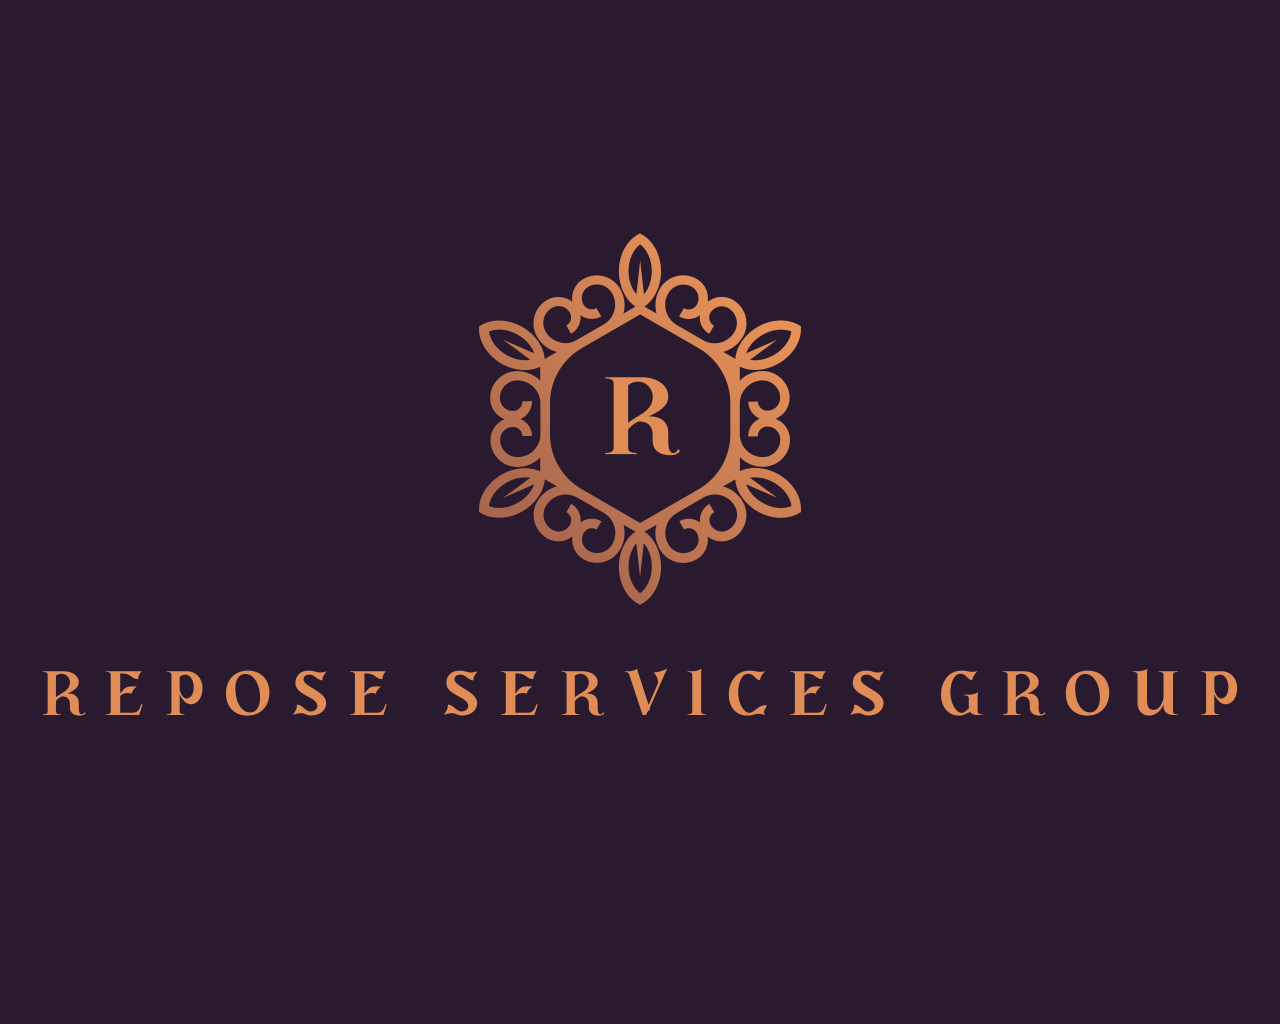 Repose Services Group